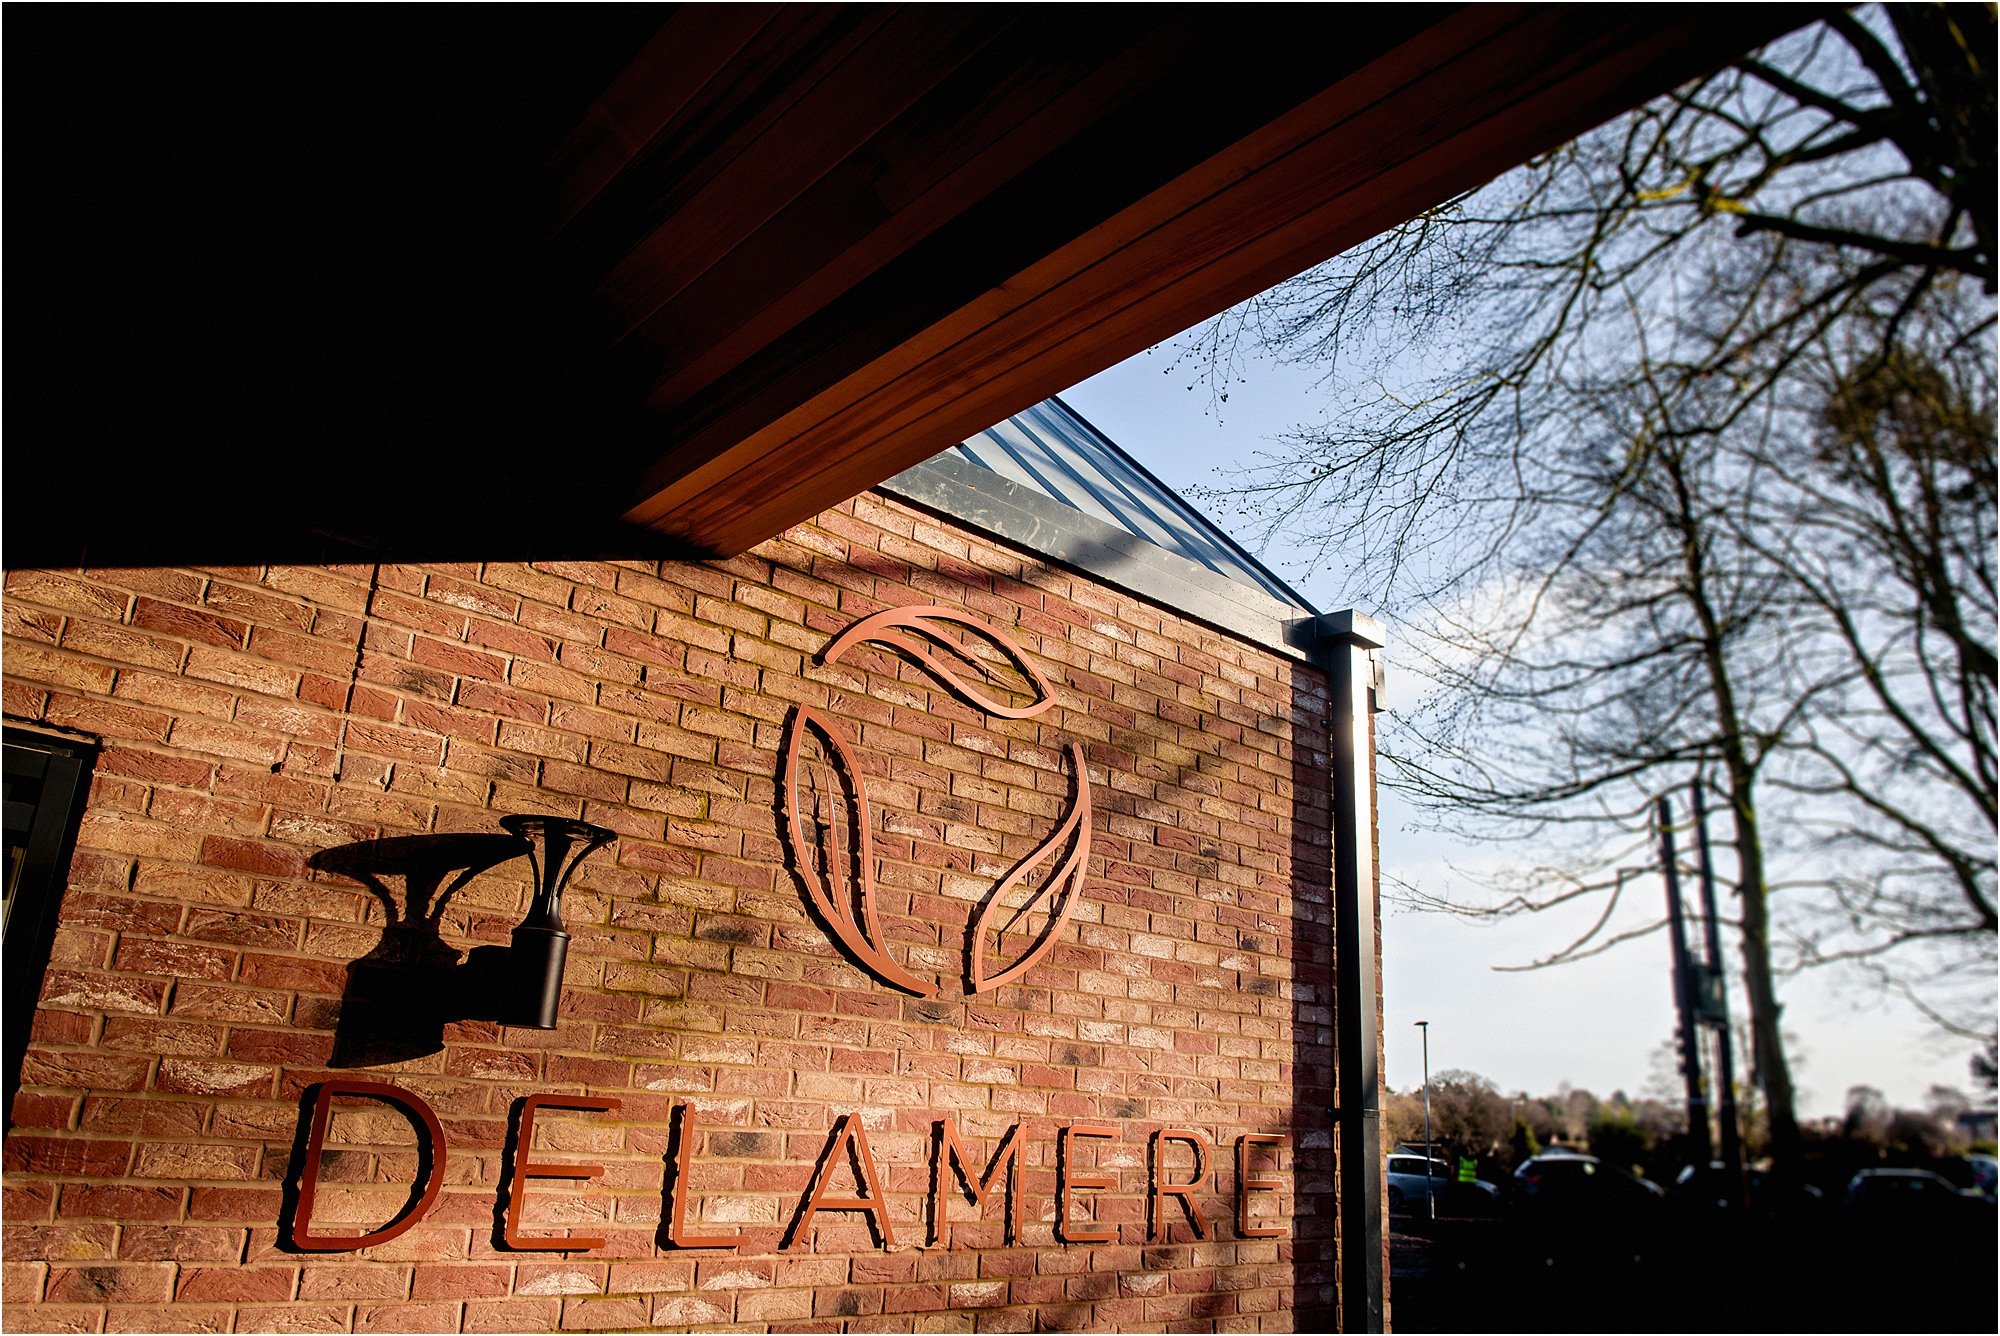 delamere-health-commercial-photography-017.jpg